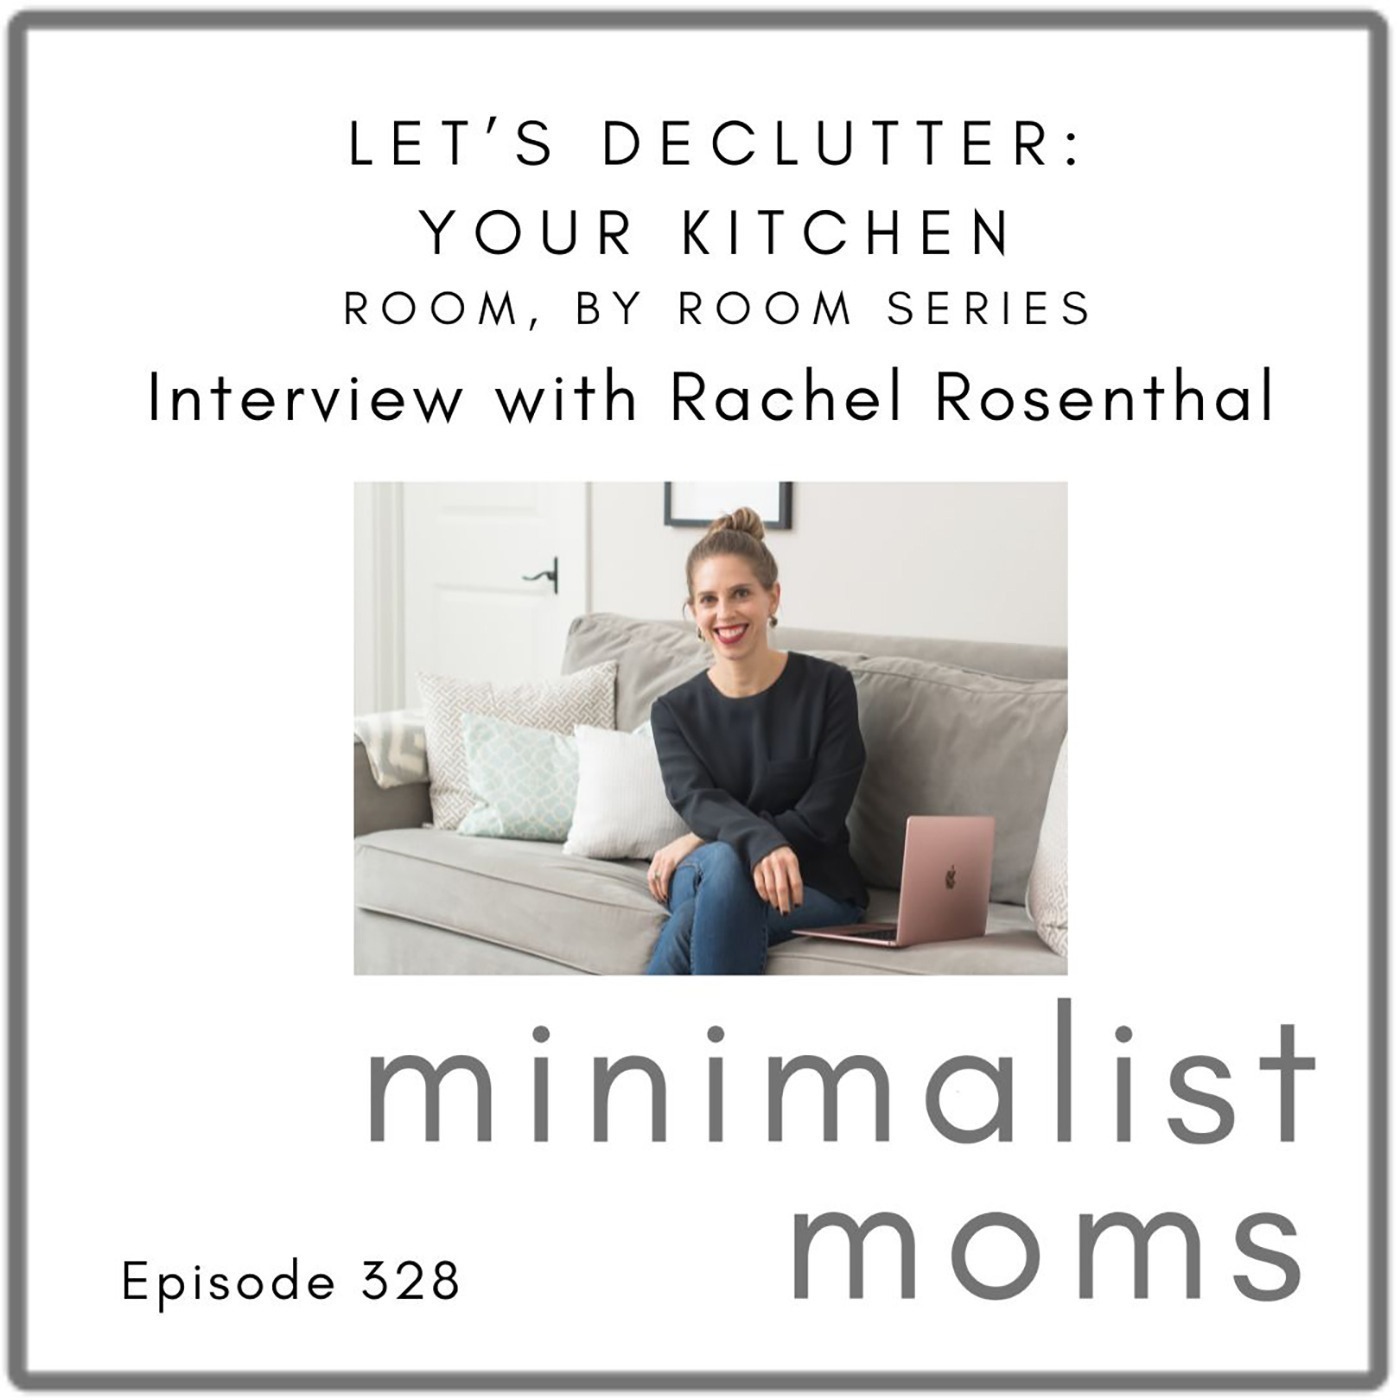 Let's Declutter: Your Kitchen with Rachel Rosenthal (EP328) [Room by Room Series]